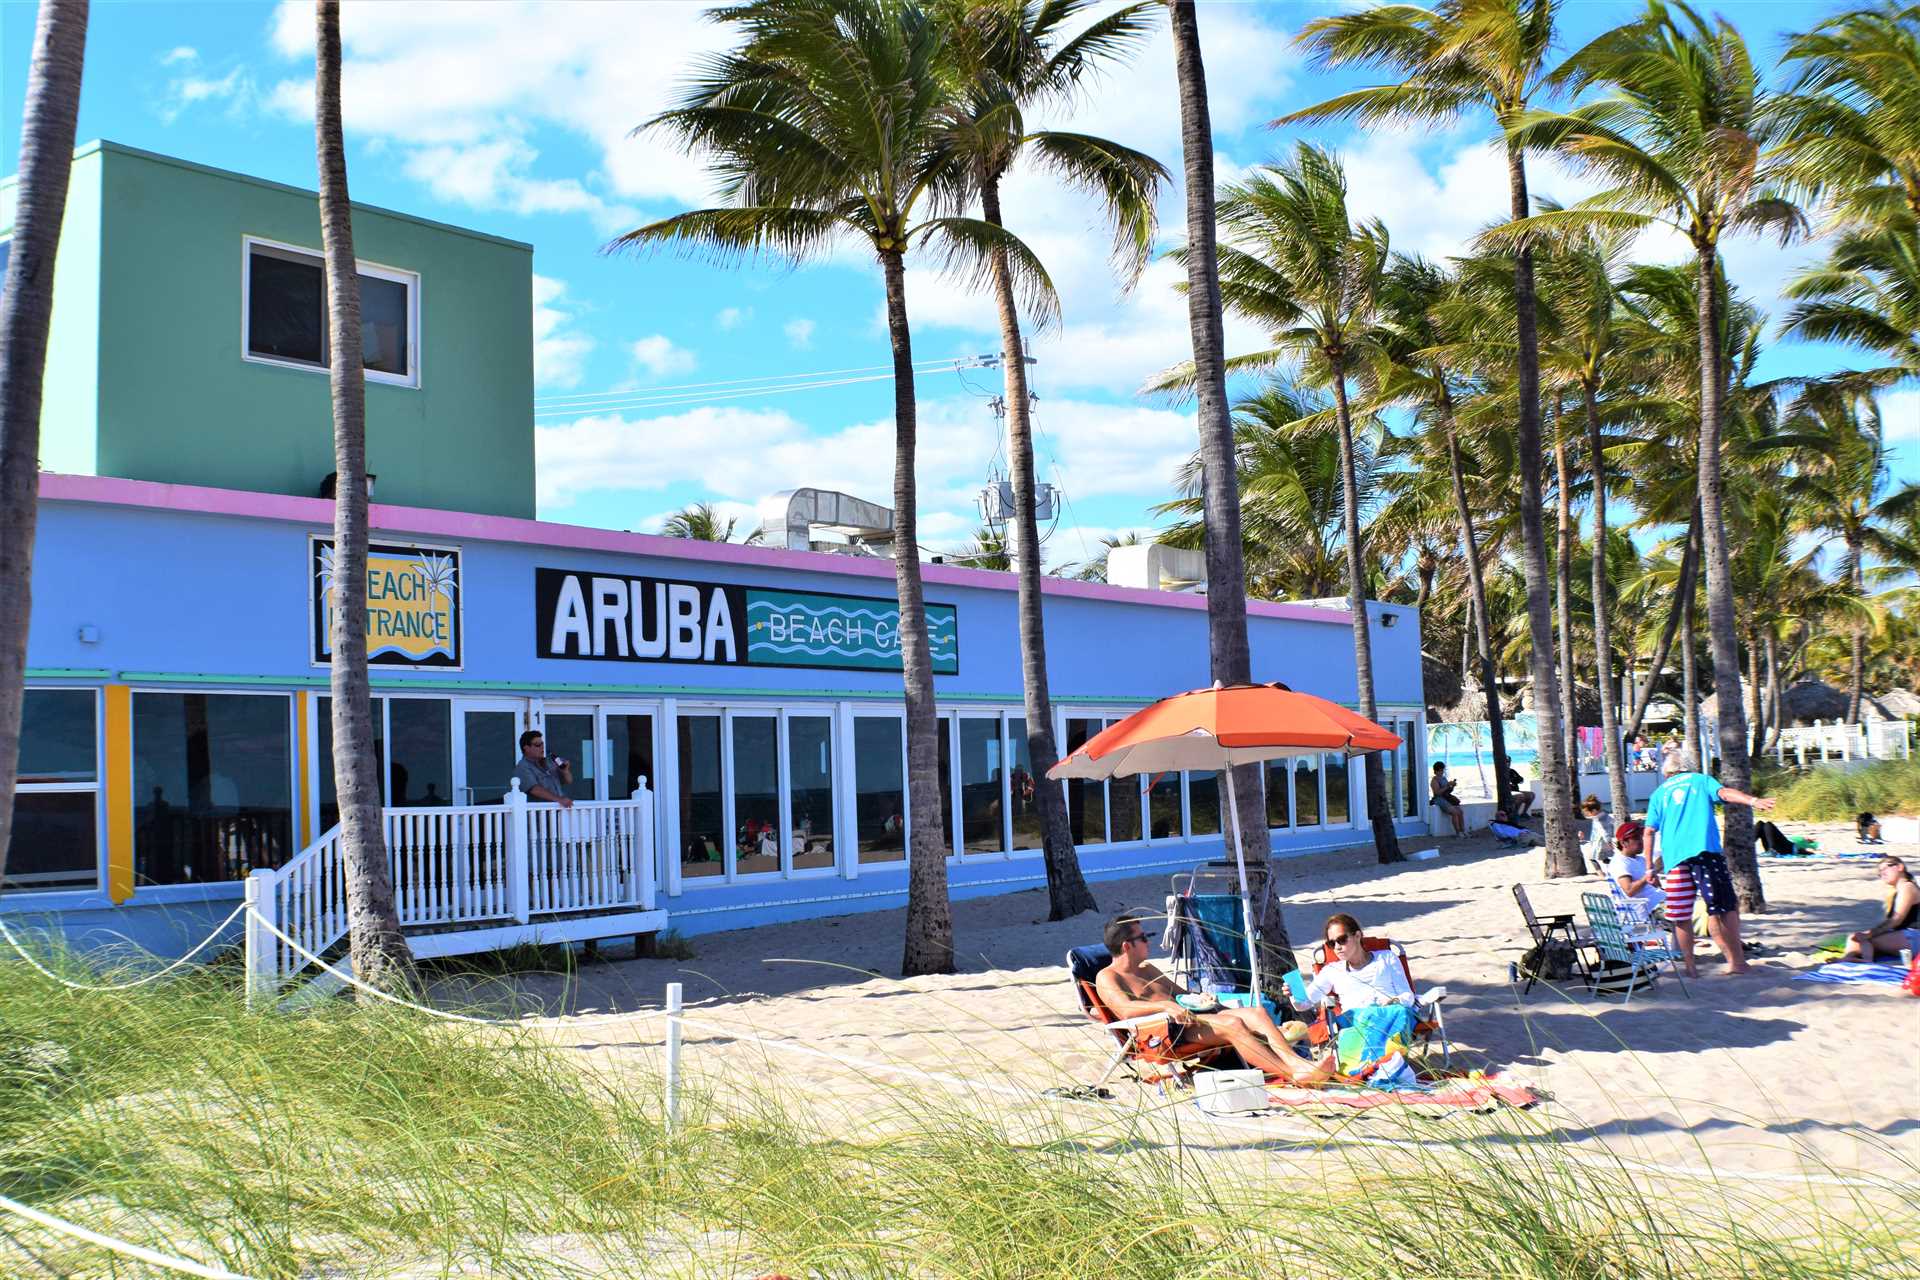 The world famous Aruba Cafe is right on the beach.